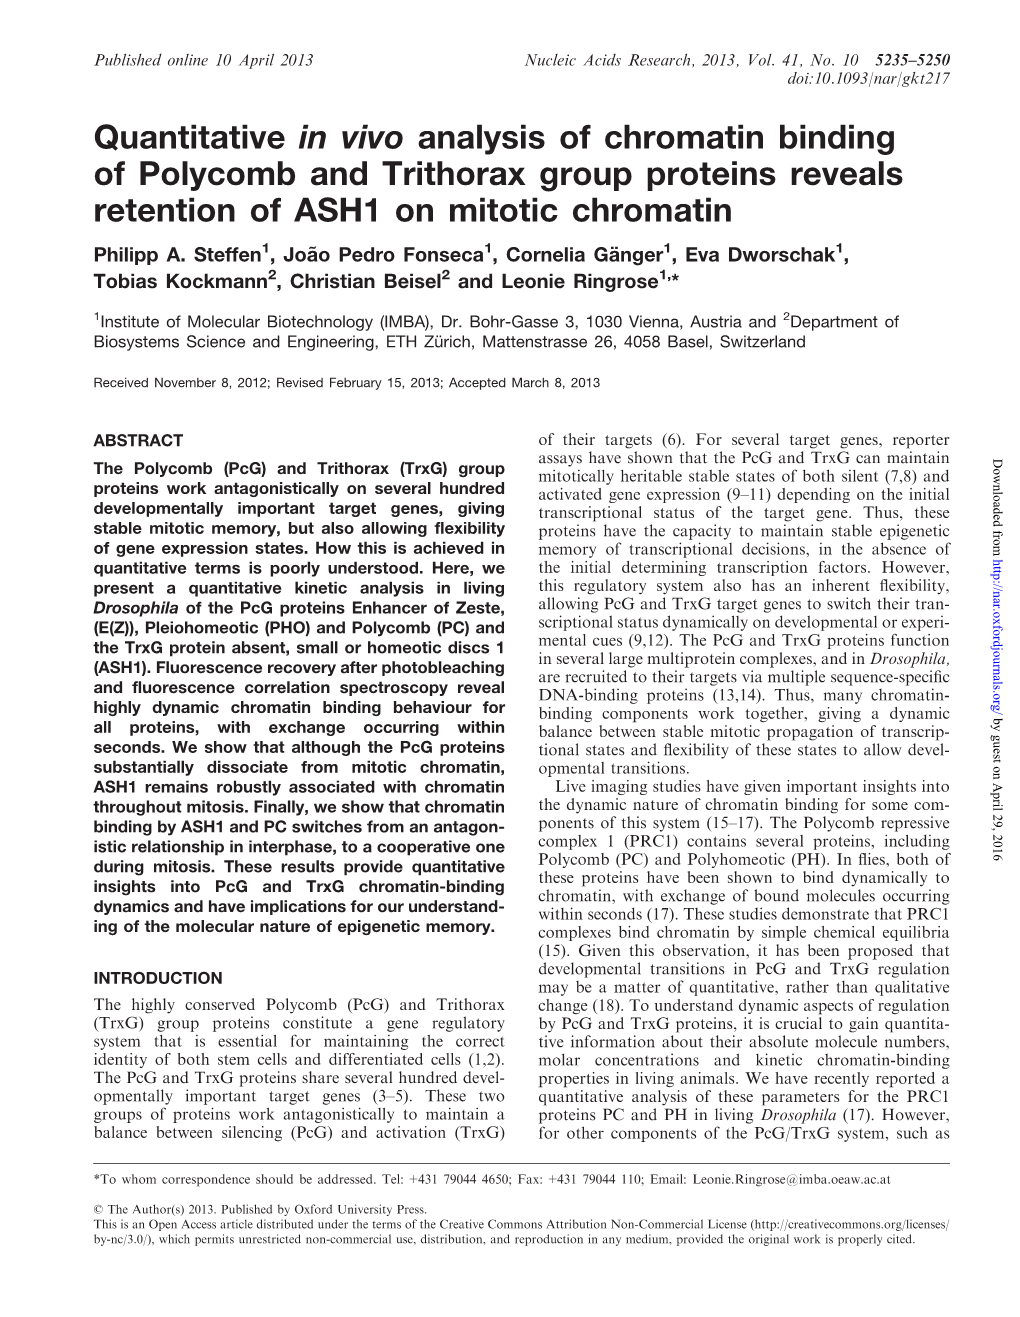 Quantitative in Vivo Analysis of Chromatin Binding of Polycomb and Trithorax Group Proteins Reveals Retention of ASH1 on Mitotic Chromatin Philipp A